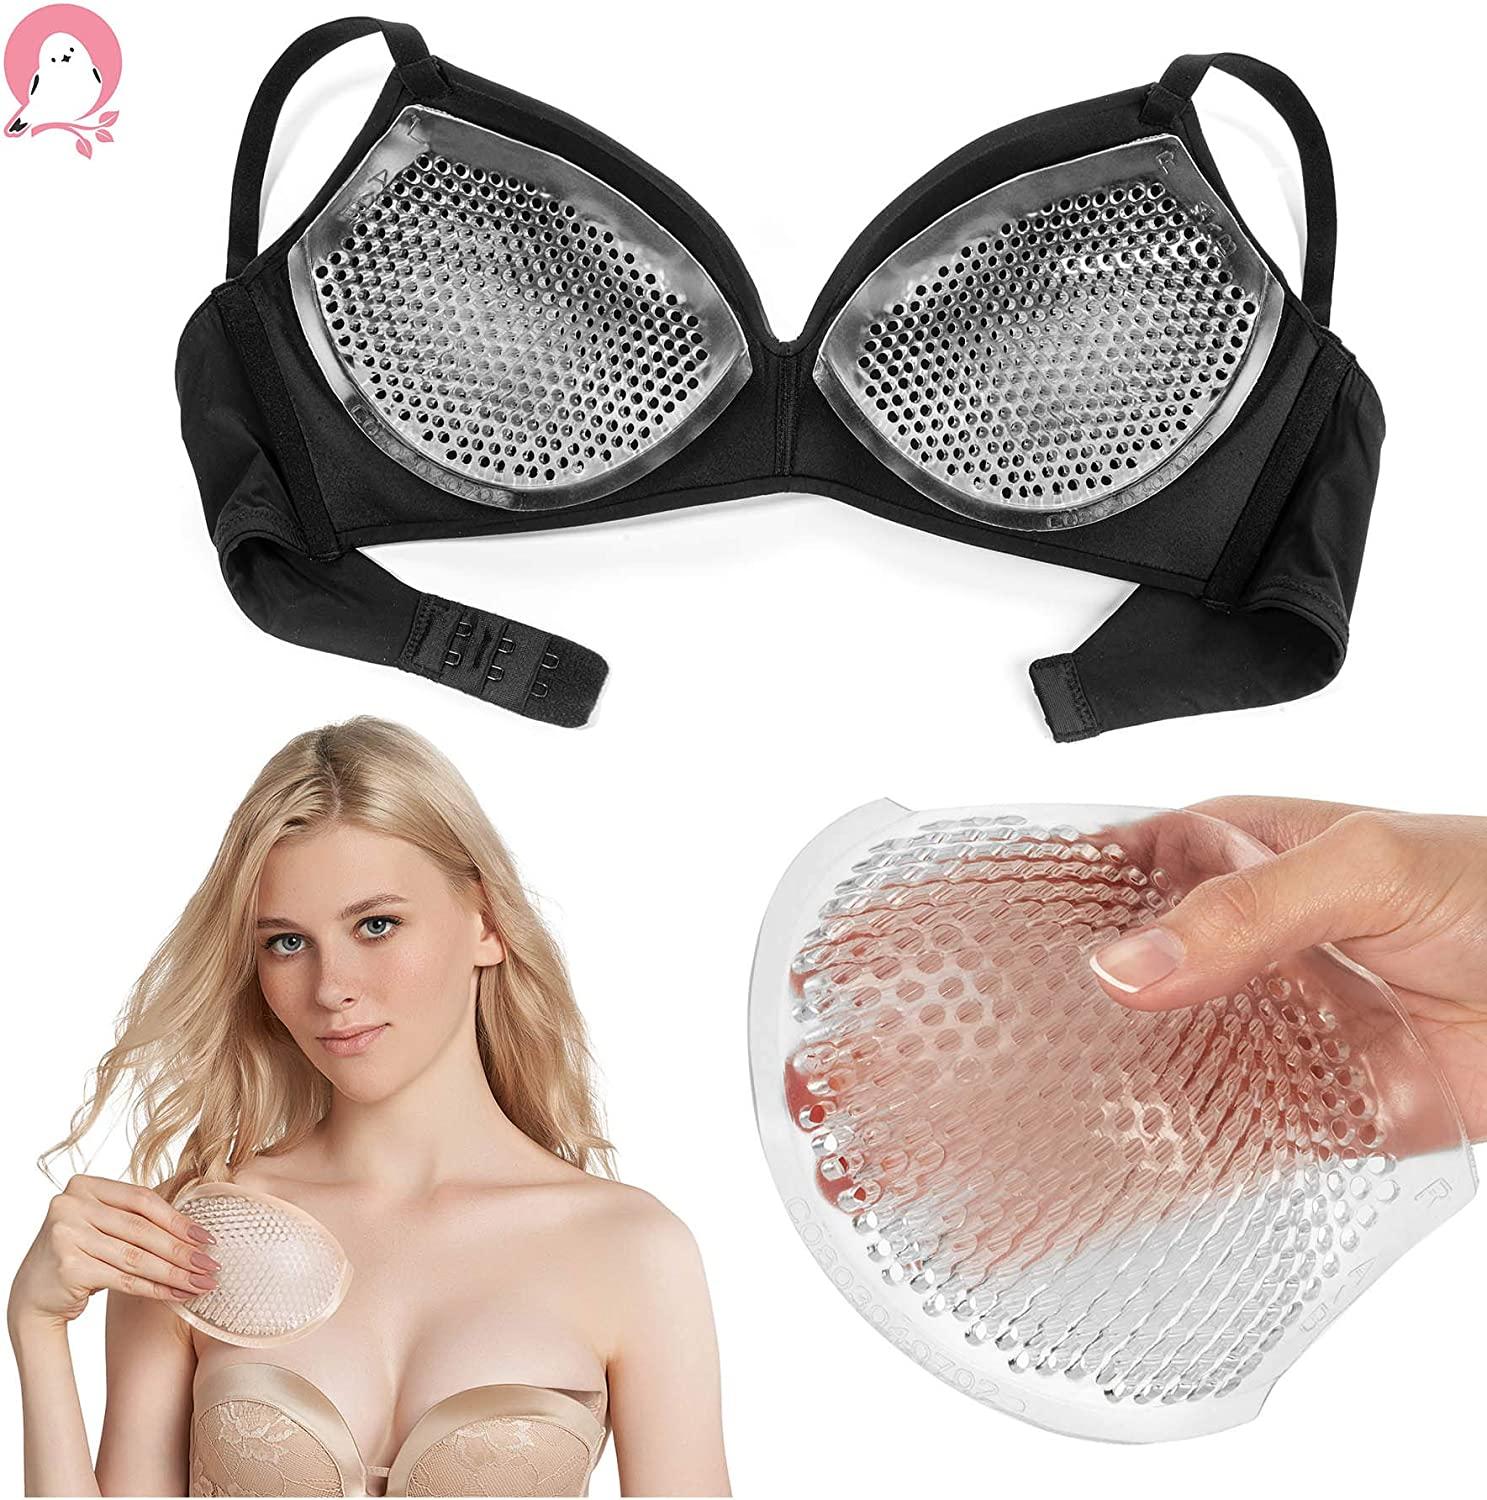 Cheap 1 Pair Bra Inserts Pads Womens Push Up Breast Enhancer for